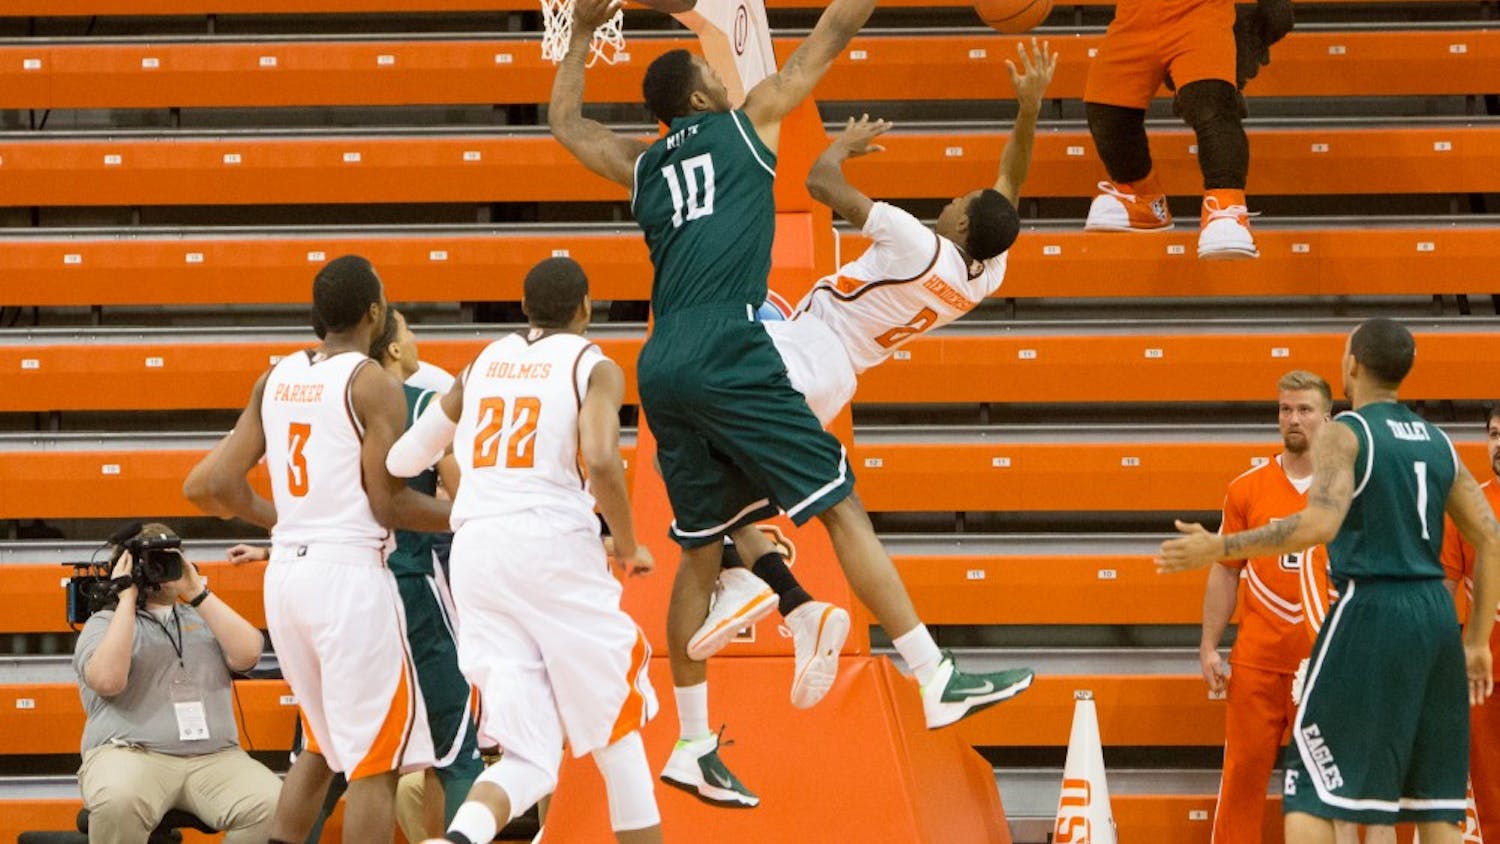 EMU center Da'Shonte Riley collects one of his three blocks in Eastern Michigan's 56-51 win over Bowling Green Wednesday night.